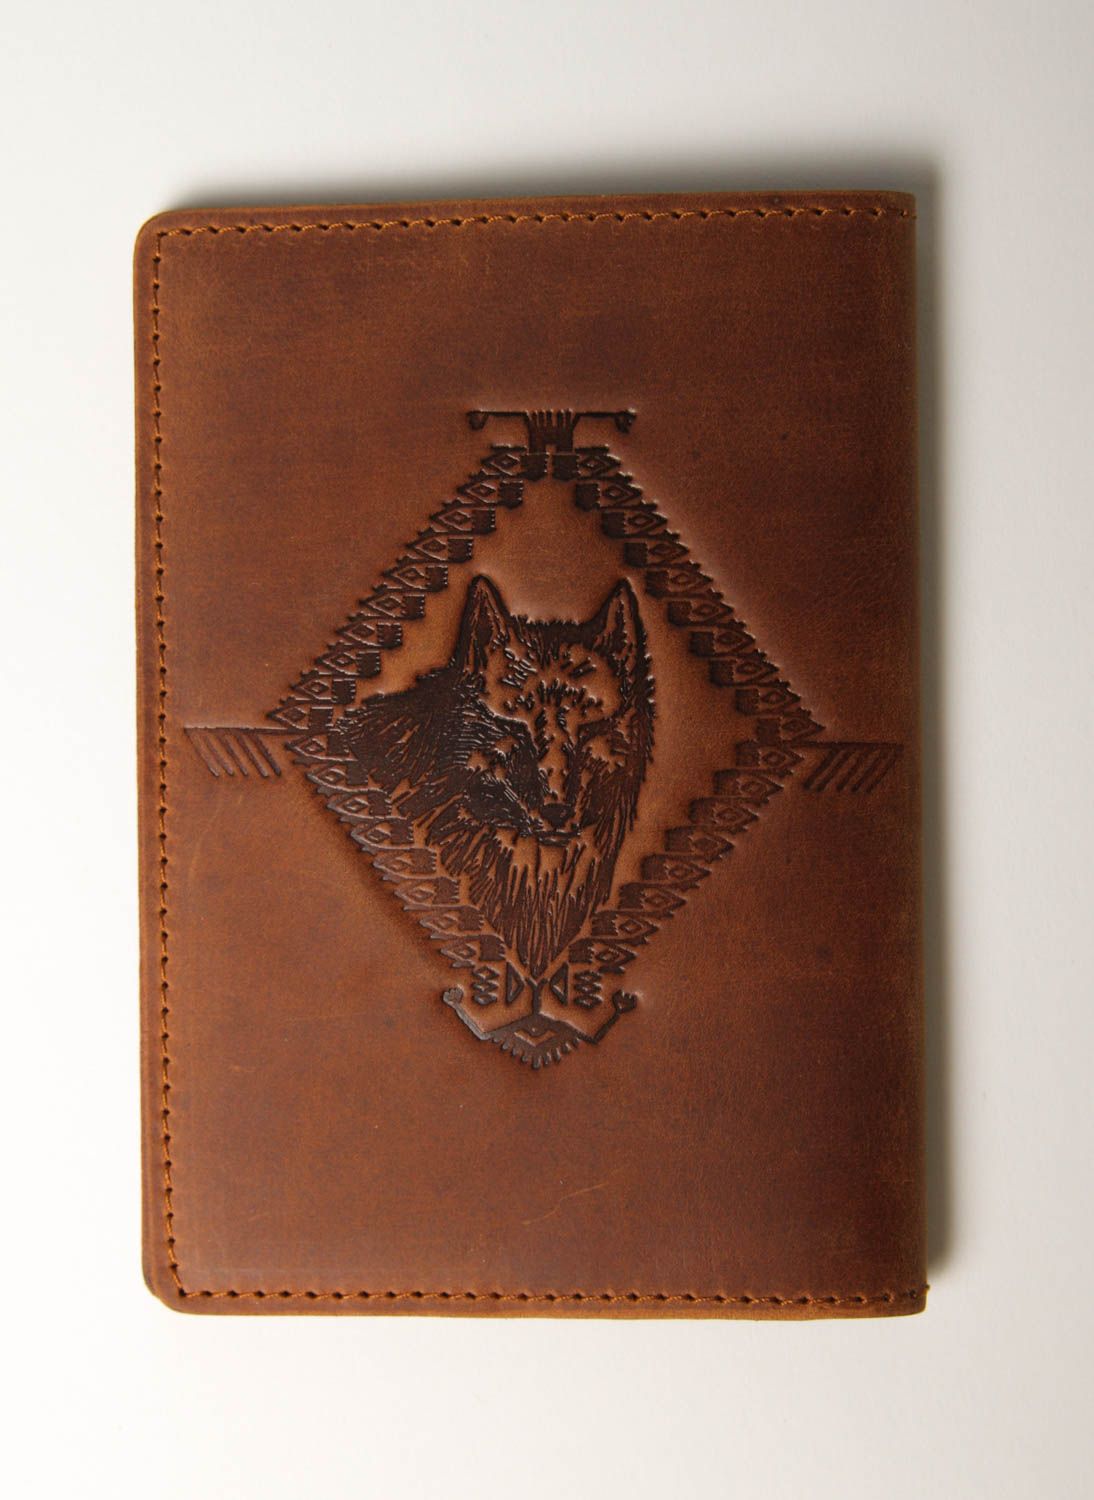 Beautiful handmade passport cover fashion accessories leather goods gift ideas photo 3